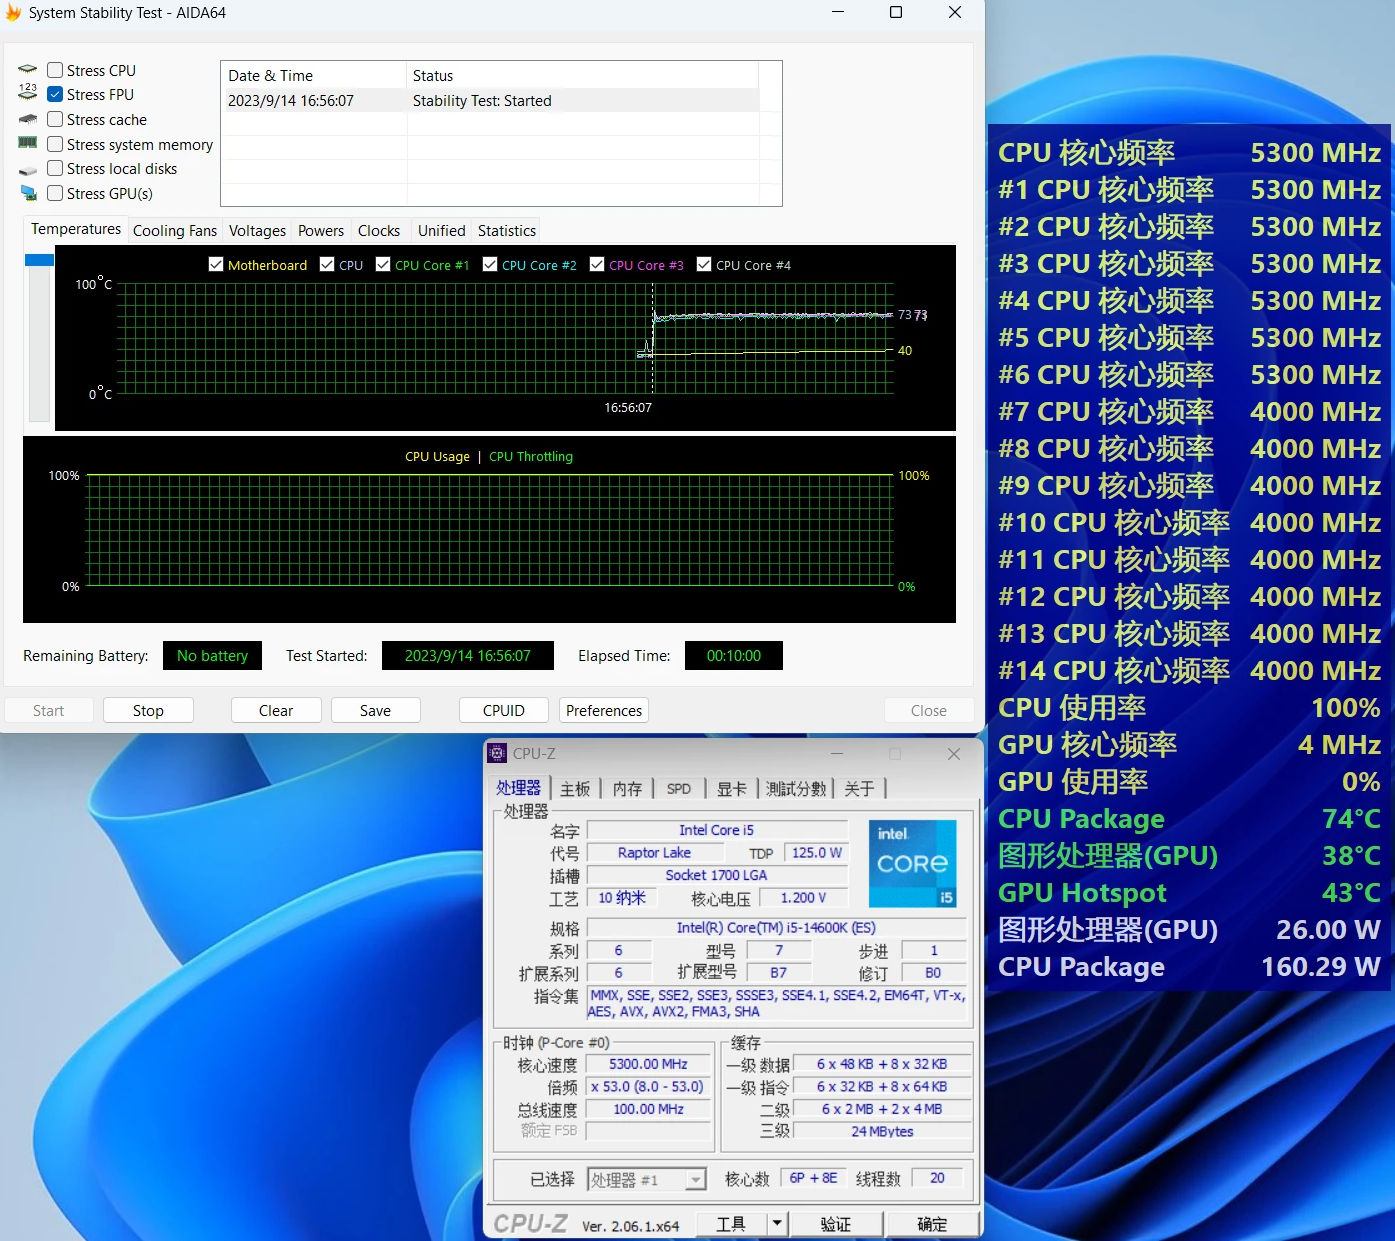 Intel Core i5-14600K with 14 cores and 5.3 GHz boost has been